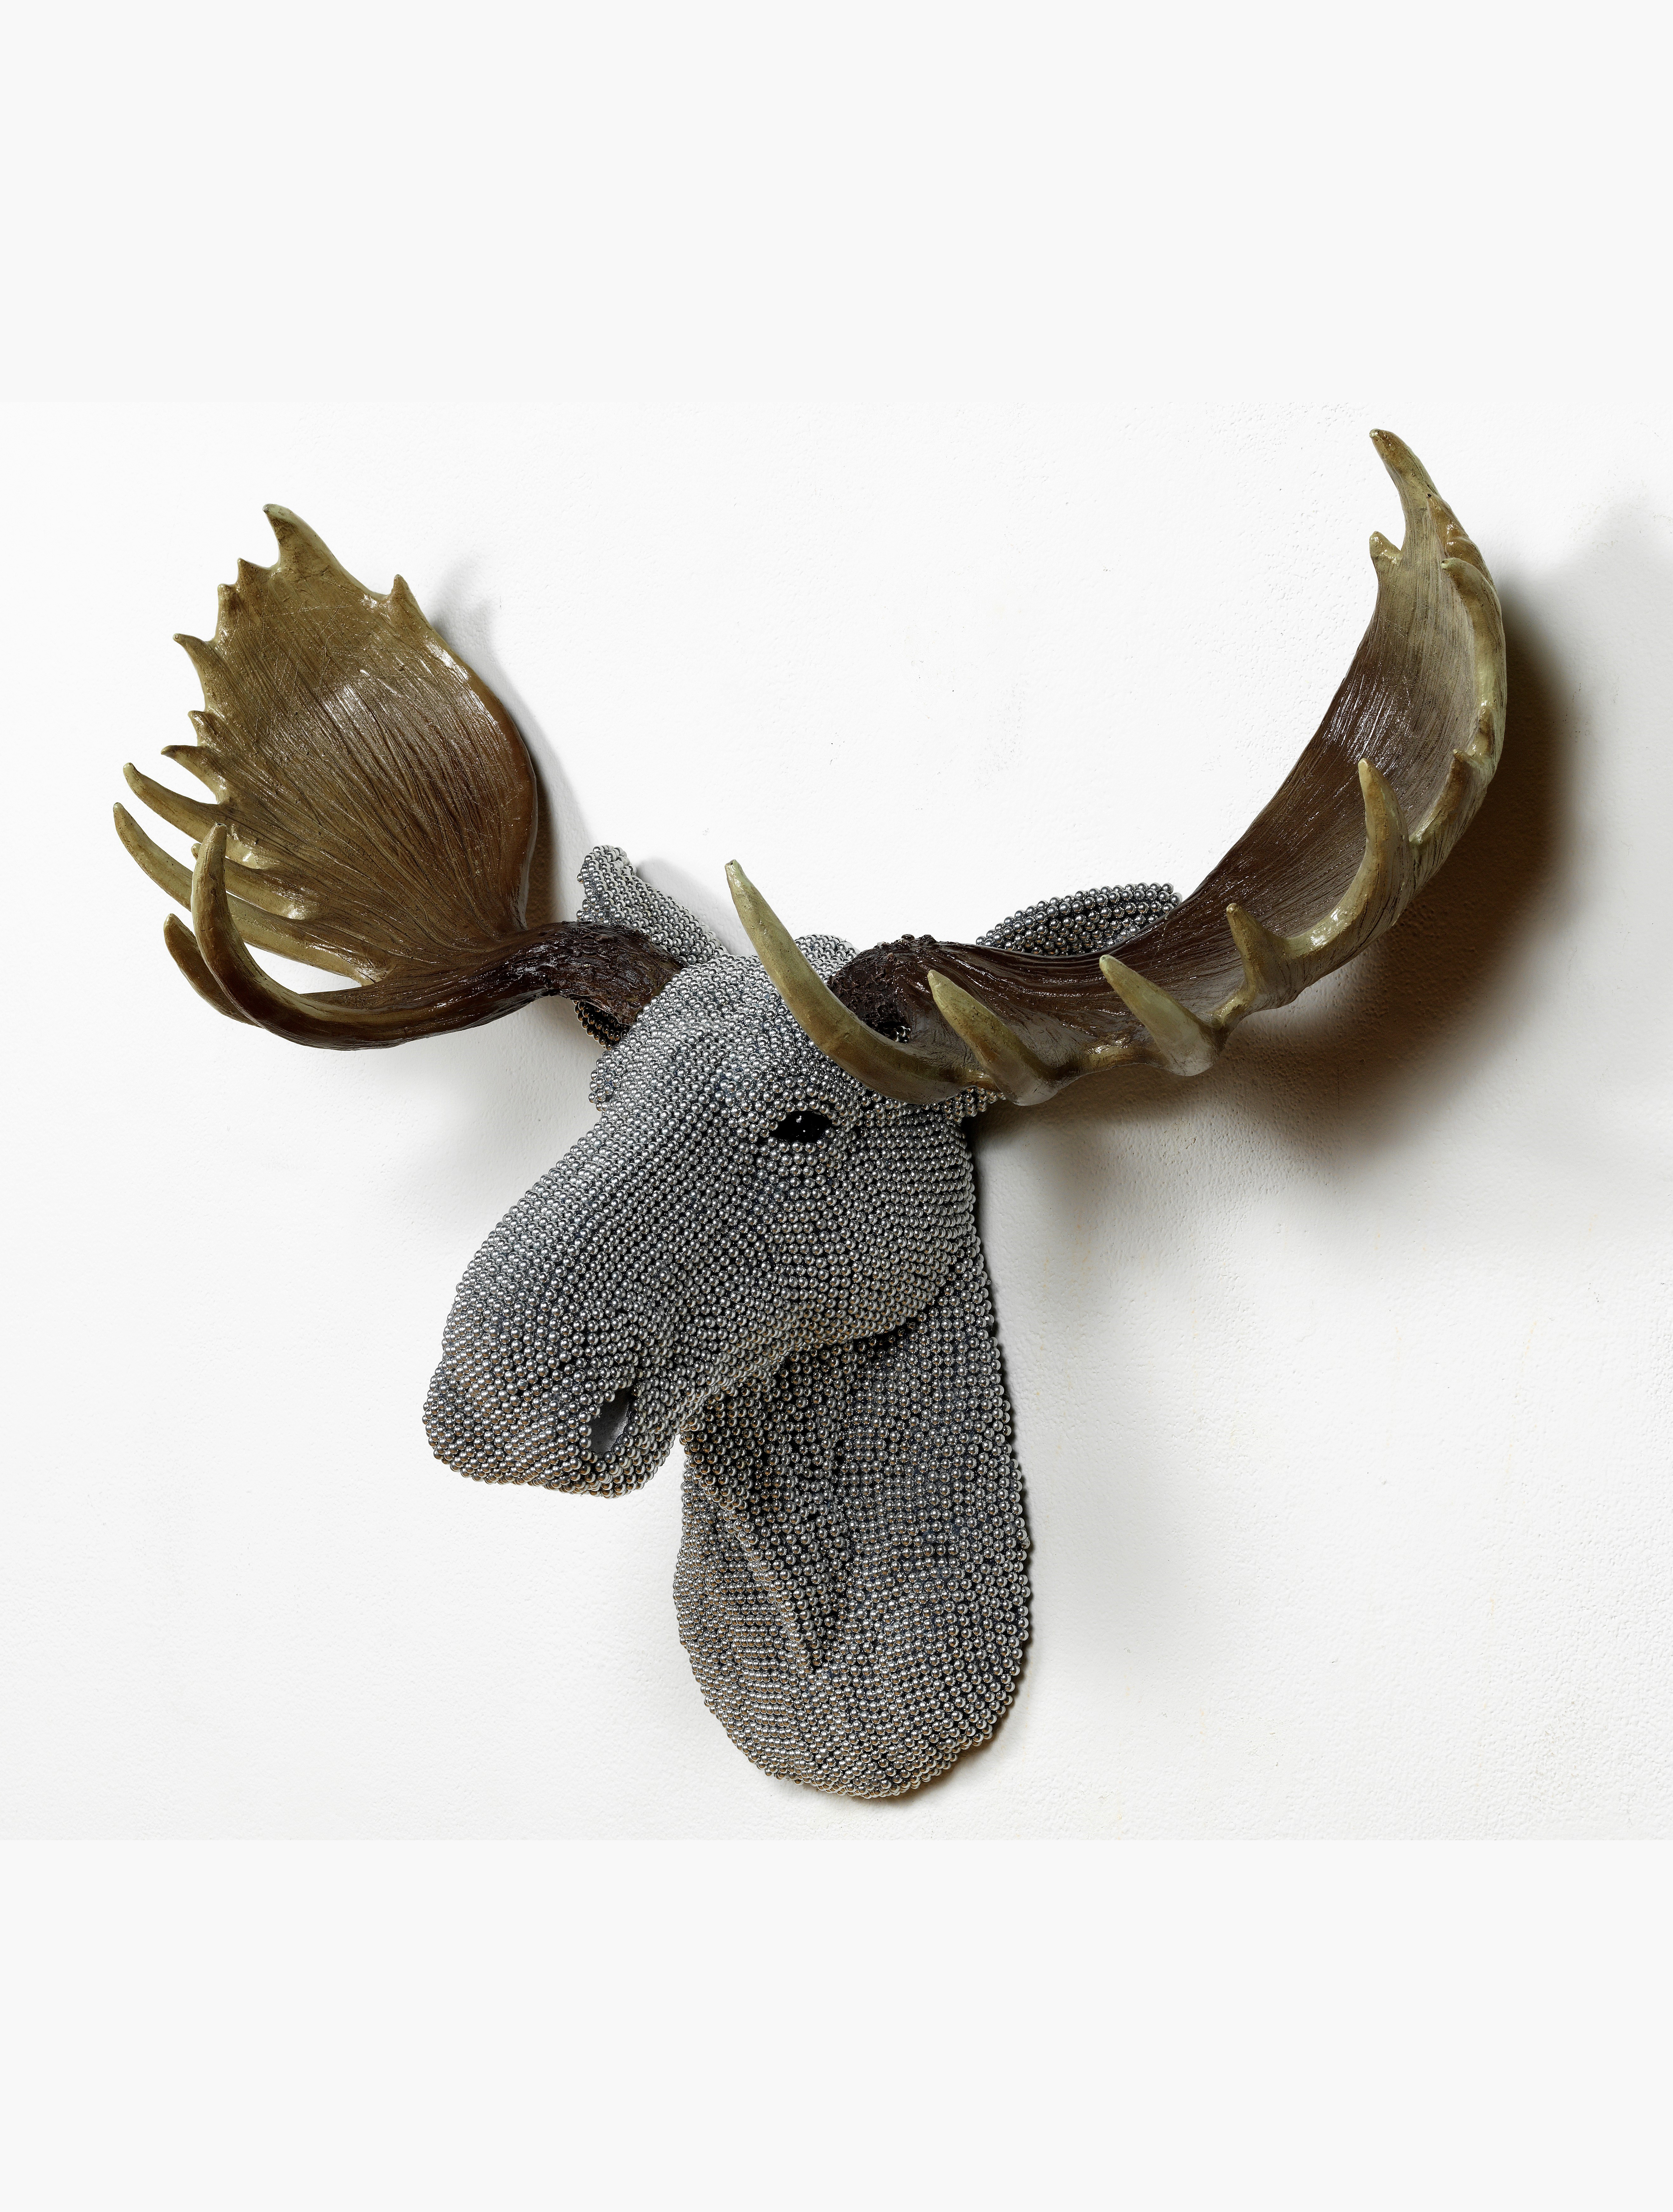 Courtney Timmermans, Moose (side view), 2012